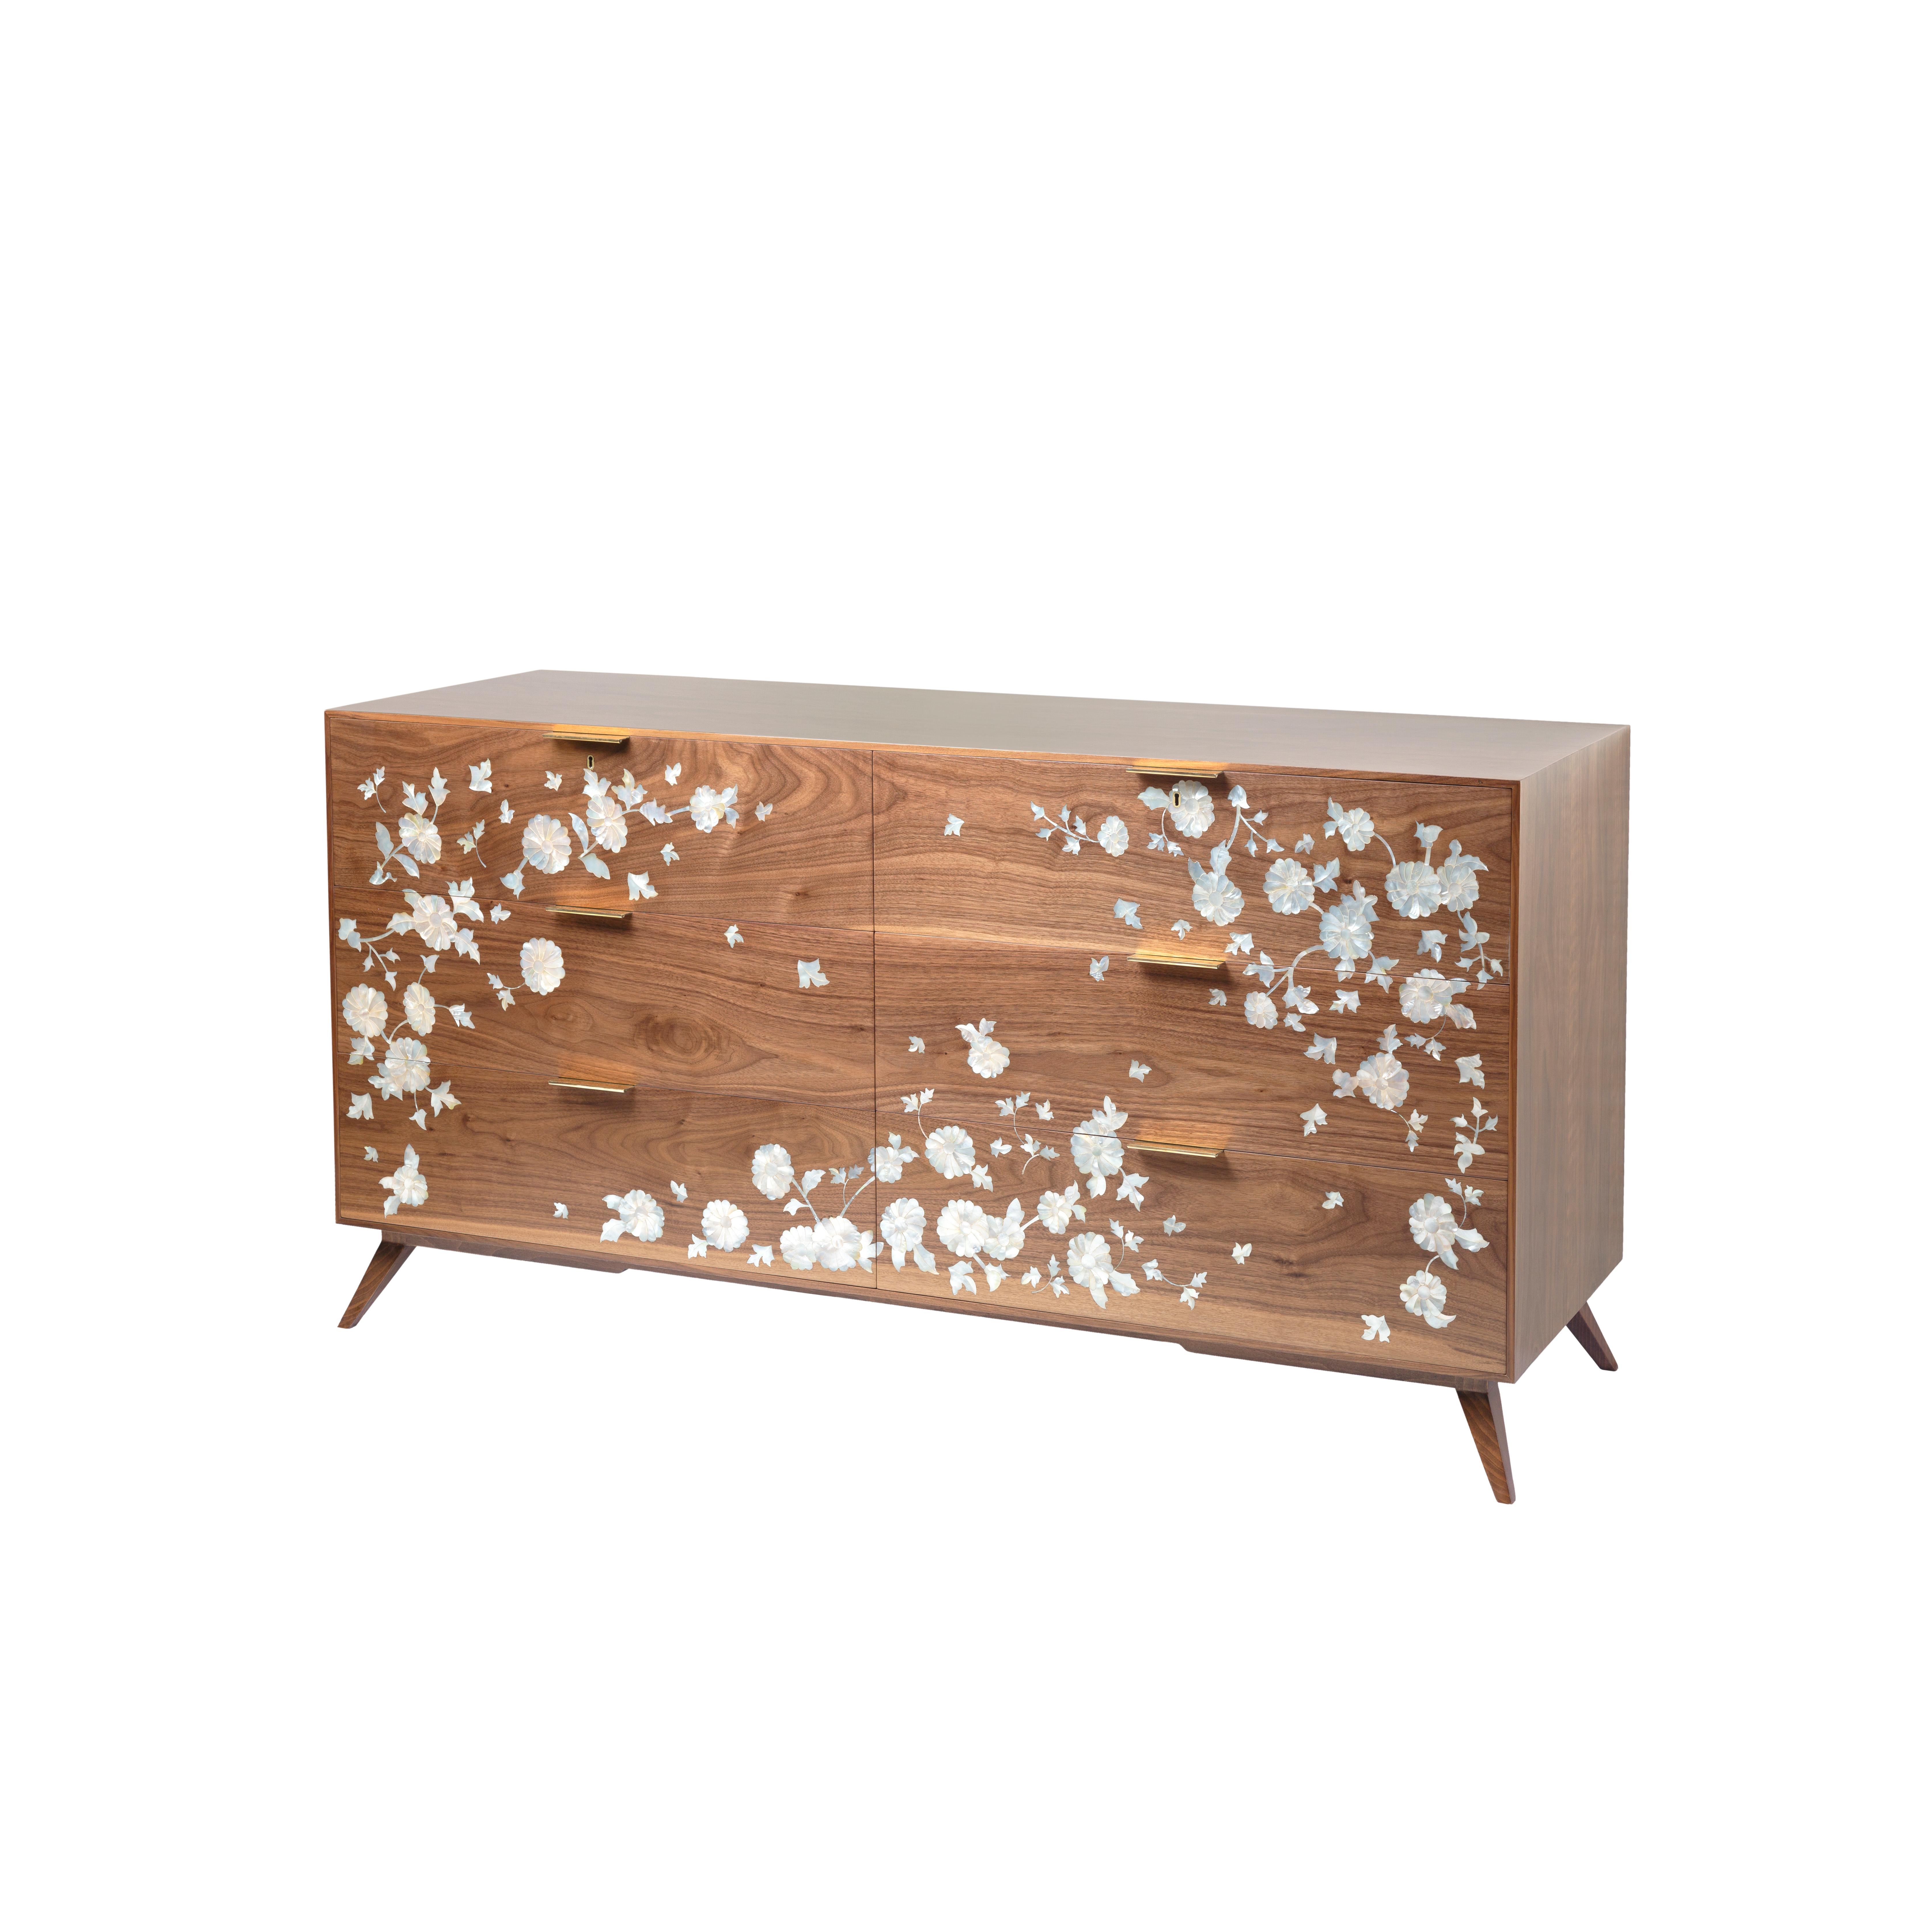 Walnut Wood Chest of Drawers with Hand-Laid Mother-of-Pearl in Delicate Floral Design. 
If you are looking for an iconic piece to beautify a space in your bedroom or guest room, and also bring happiness, this chest of drawers will do the works! It